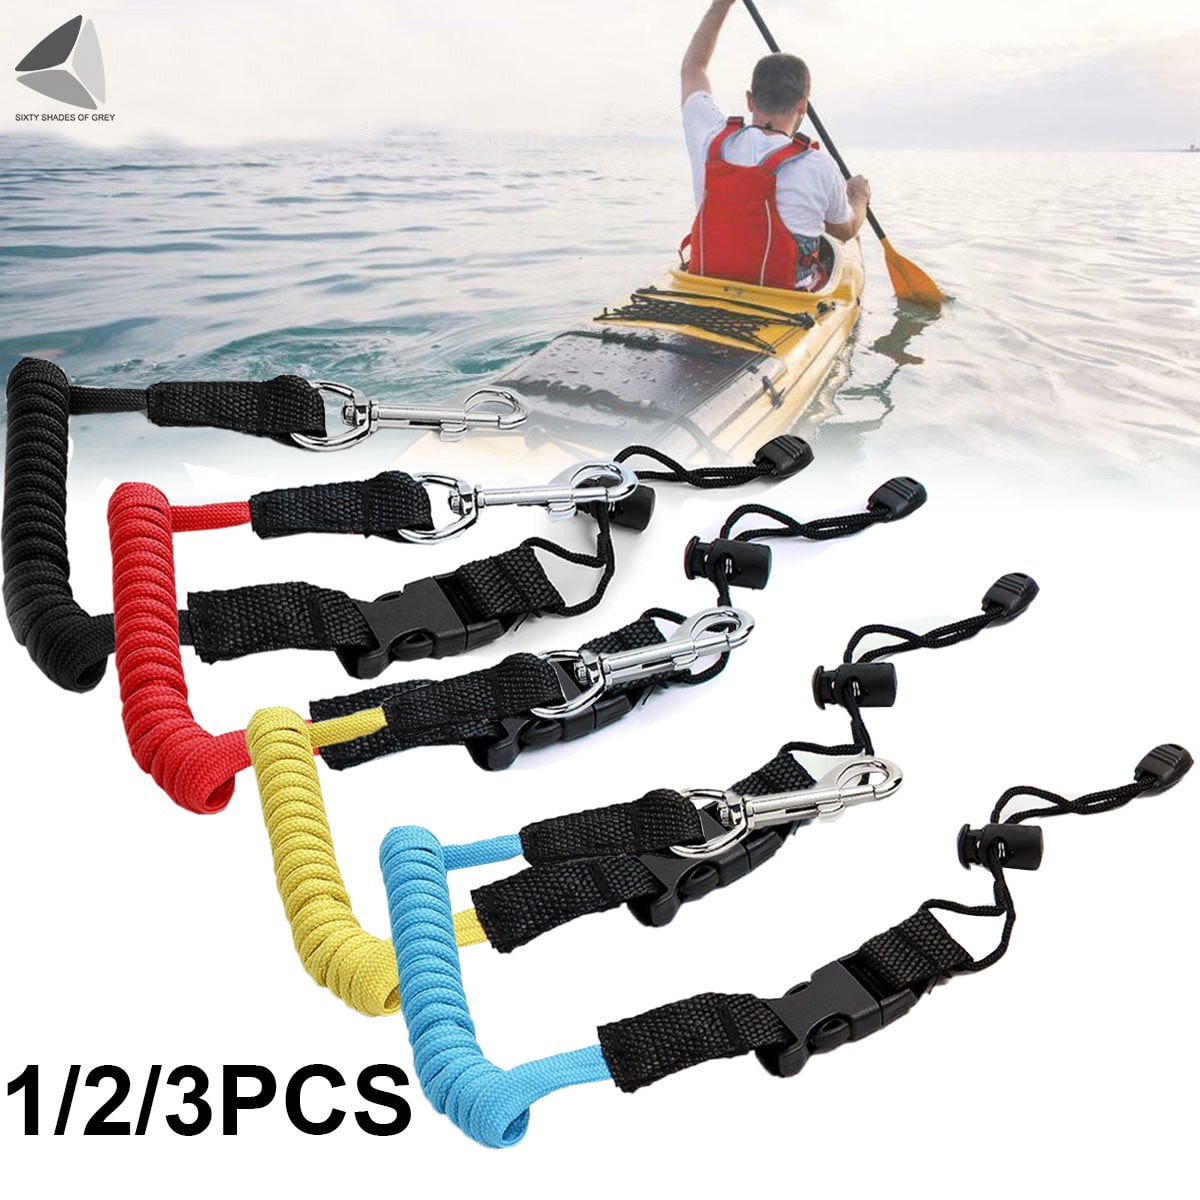 Pelican - Paddle Leash And Leash Fishing Rod - Paddle Holder - Kayak Accessories Strechable Coiled Rod For Kayak And SUP Paddles